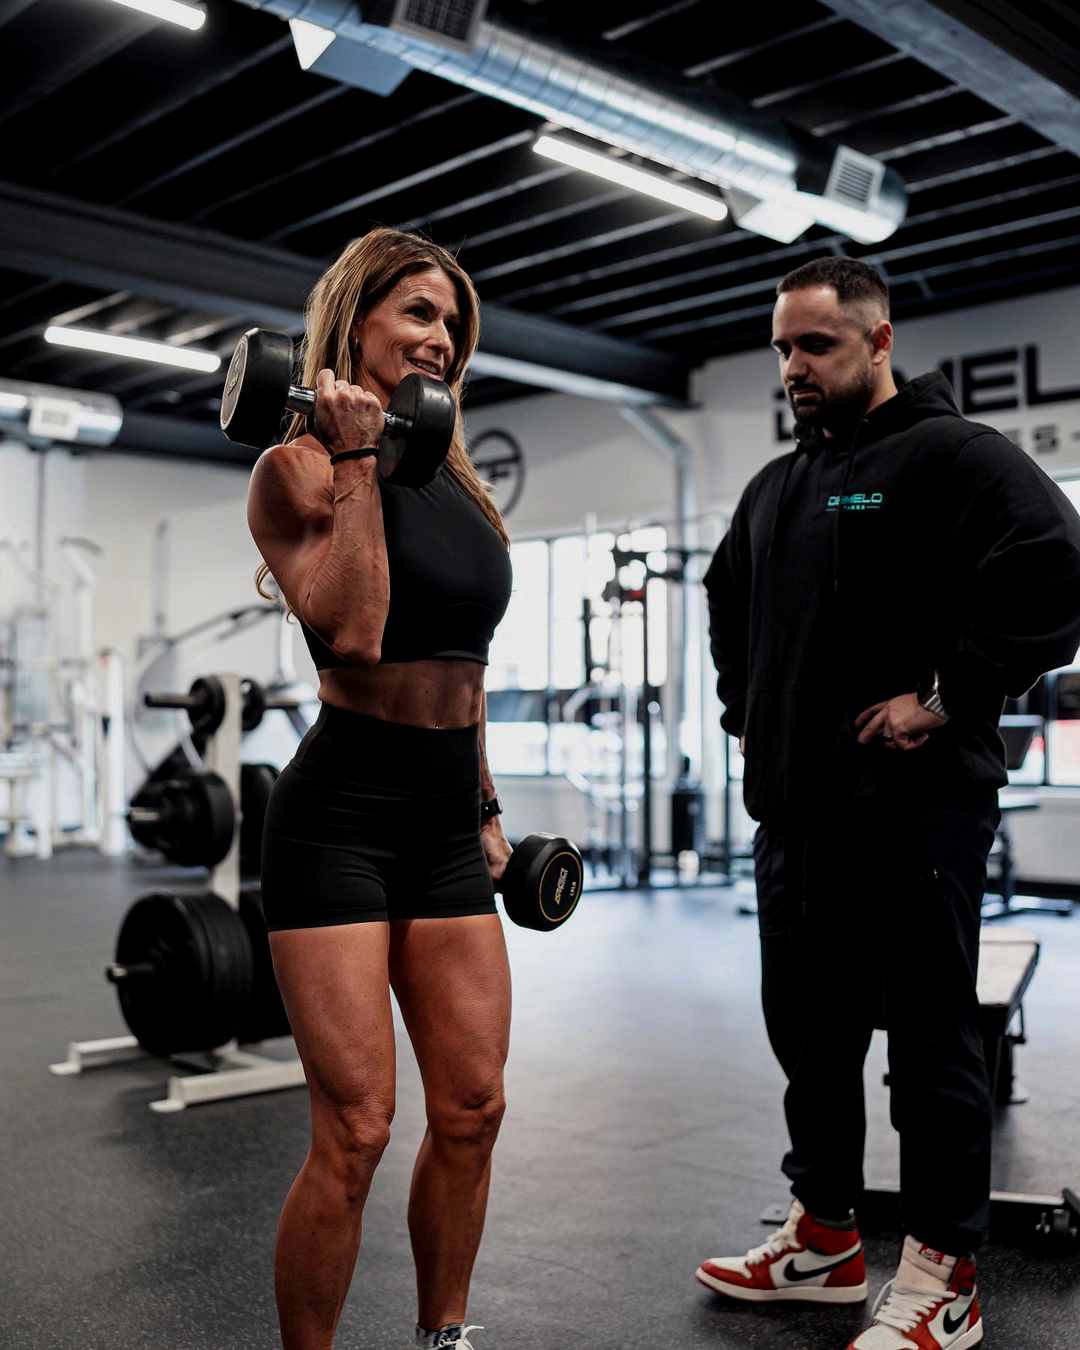 A woman is lifting hand weights in either hand while Josh DeMelo spots her, making sure form is correct and progress is being made